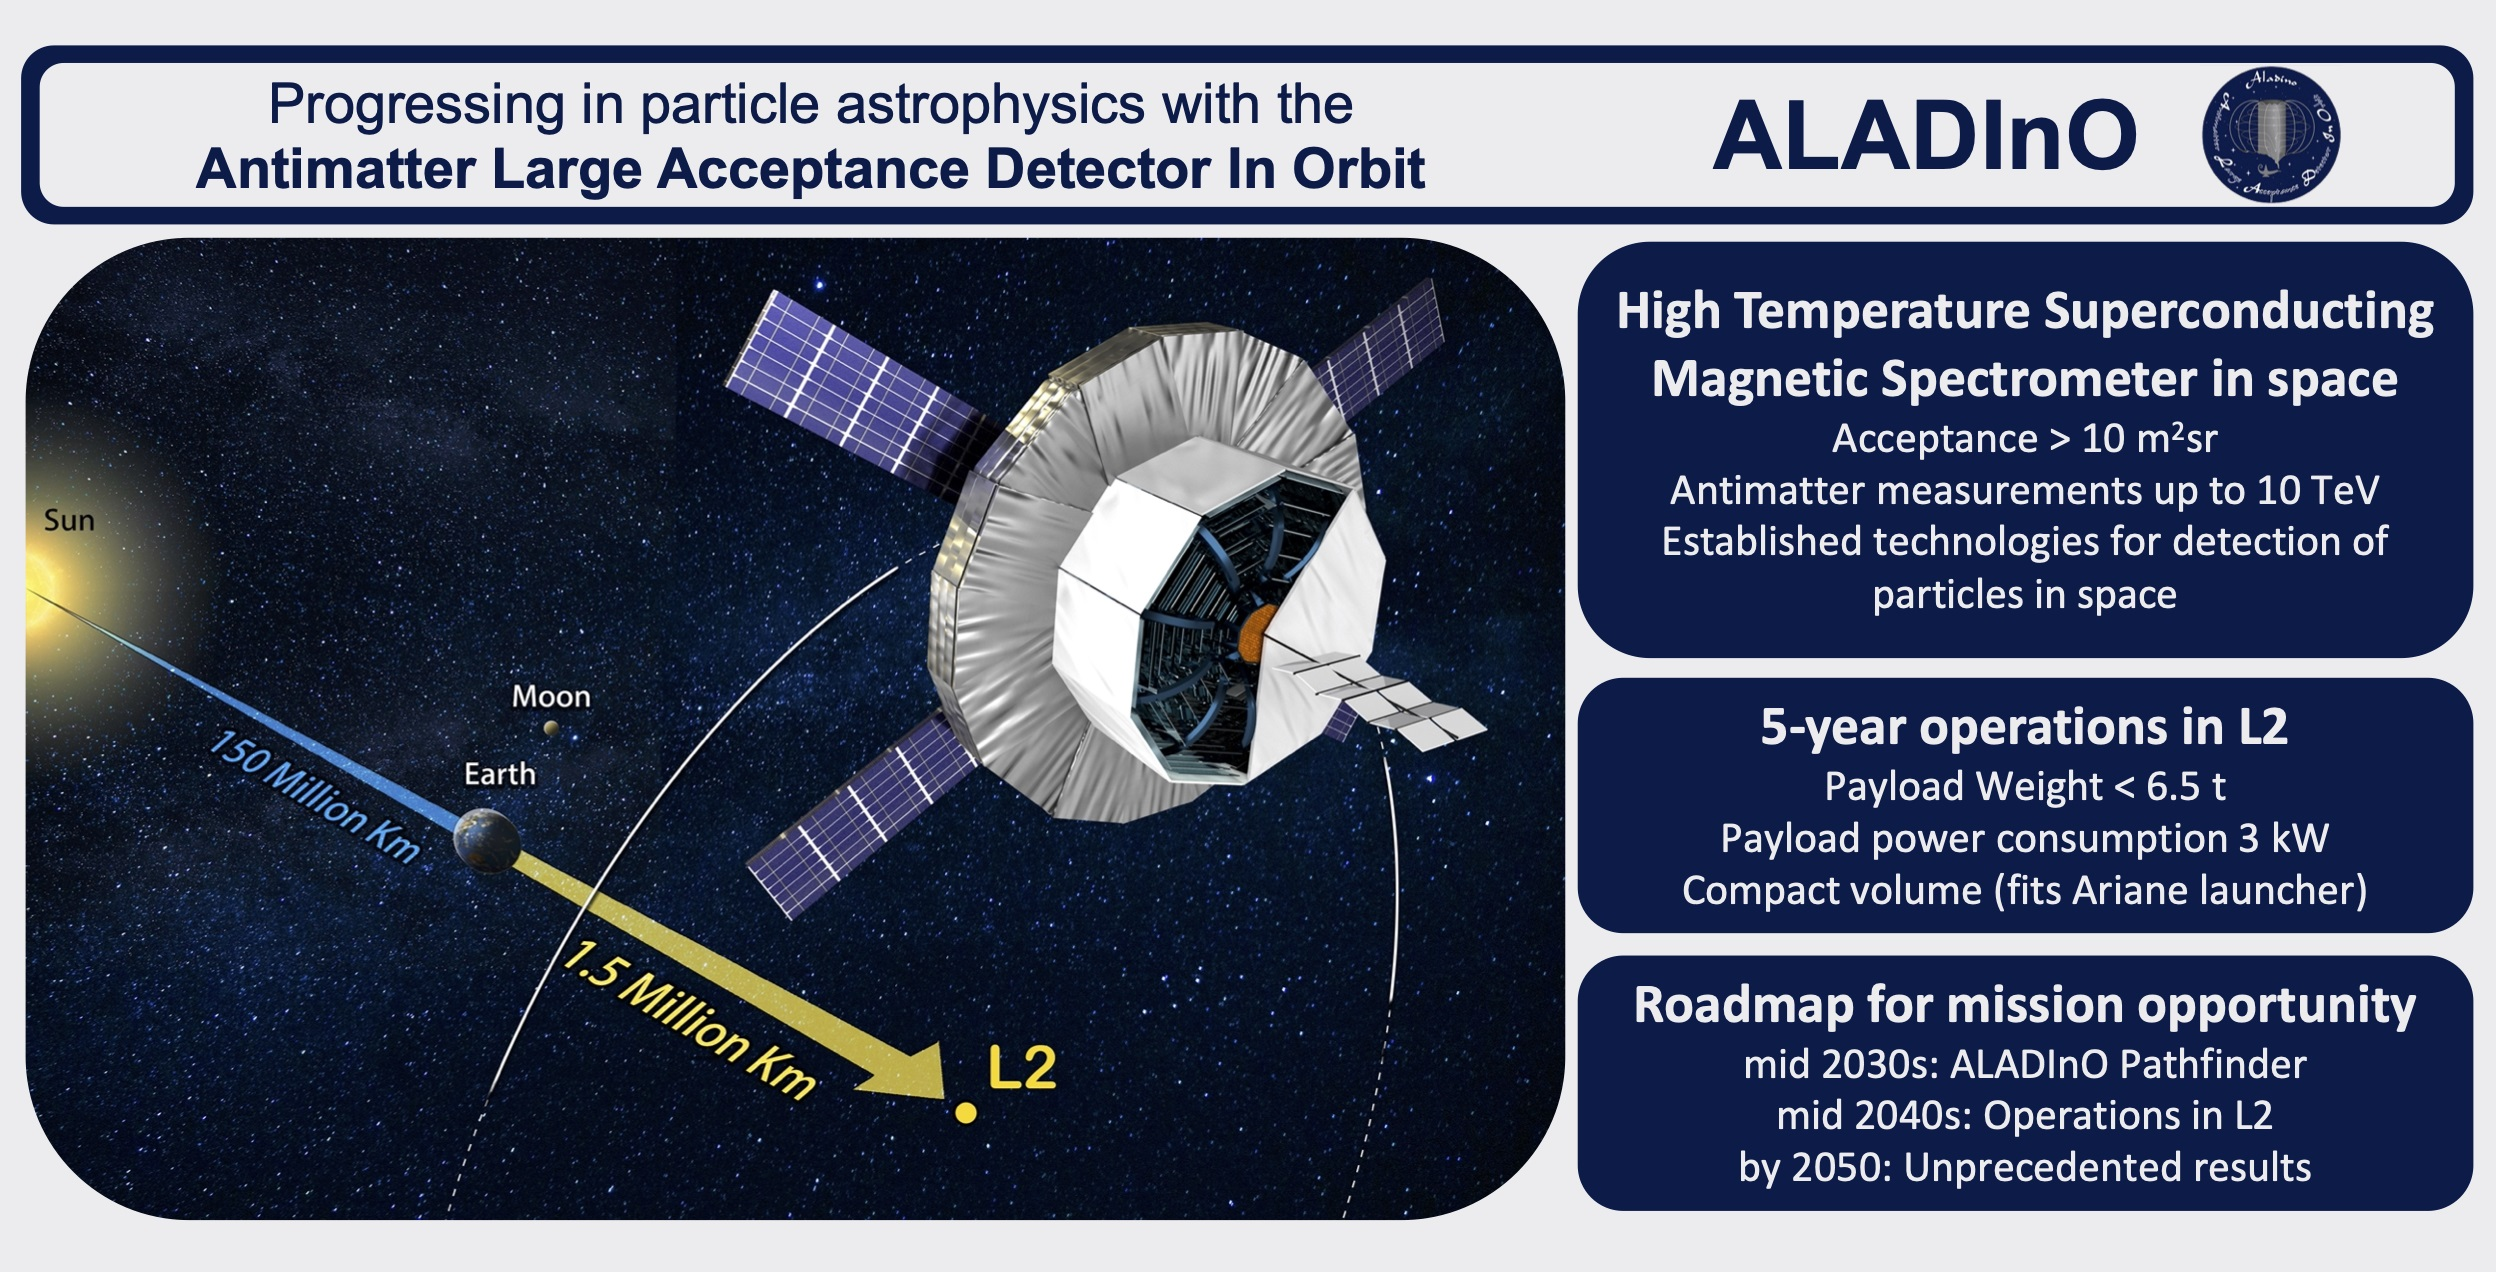 Instruments | Free Full-Text Orbit Antimatter Design (ALADInO) an of Acceptance In Detector | Large